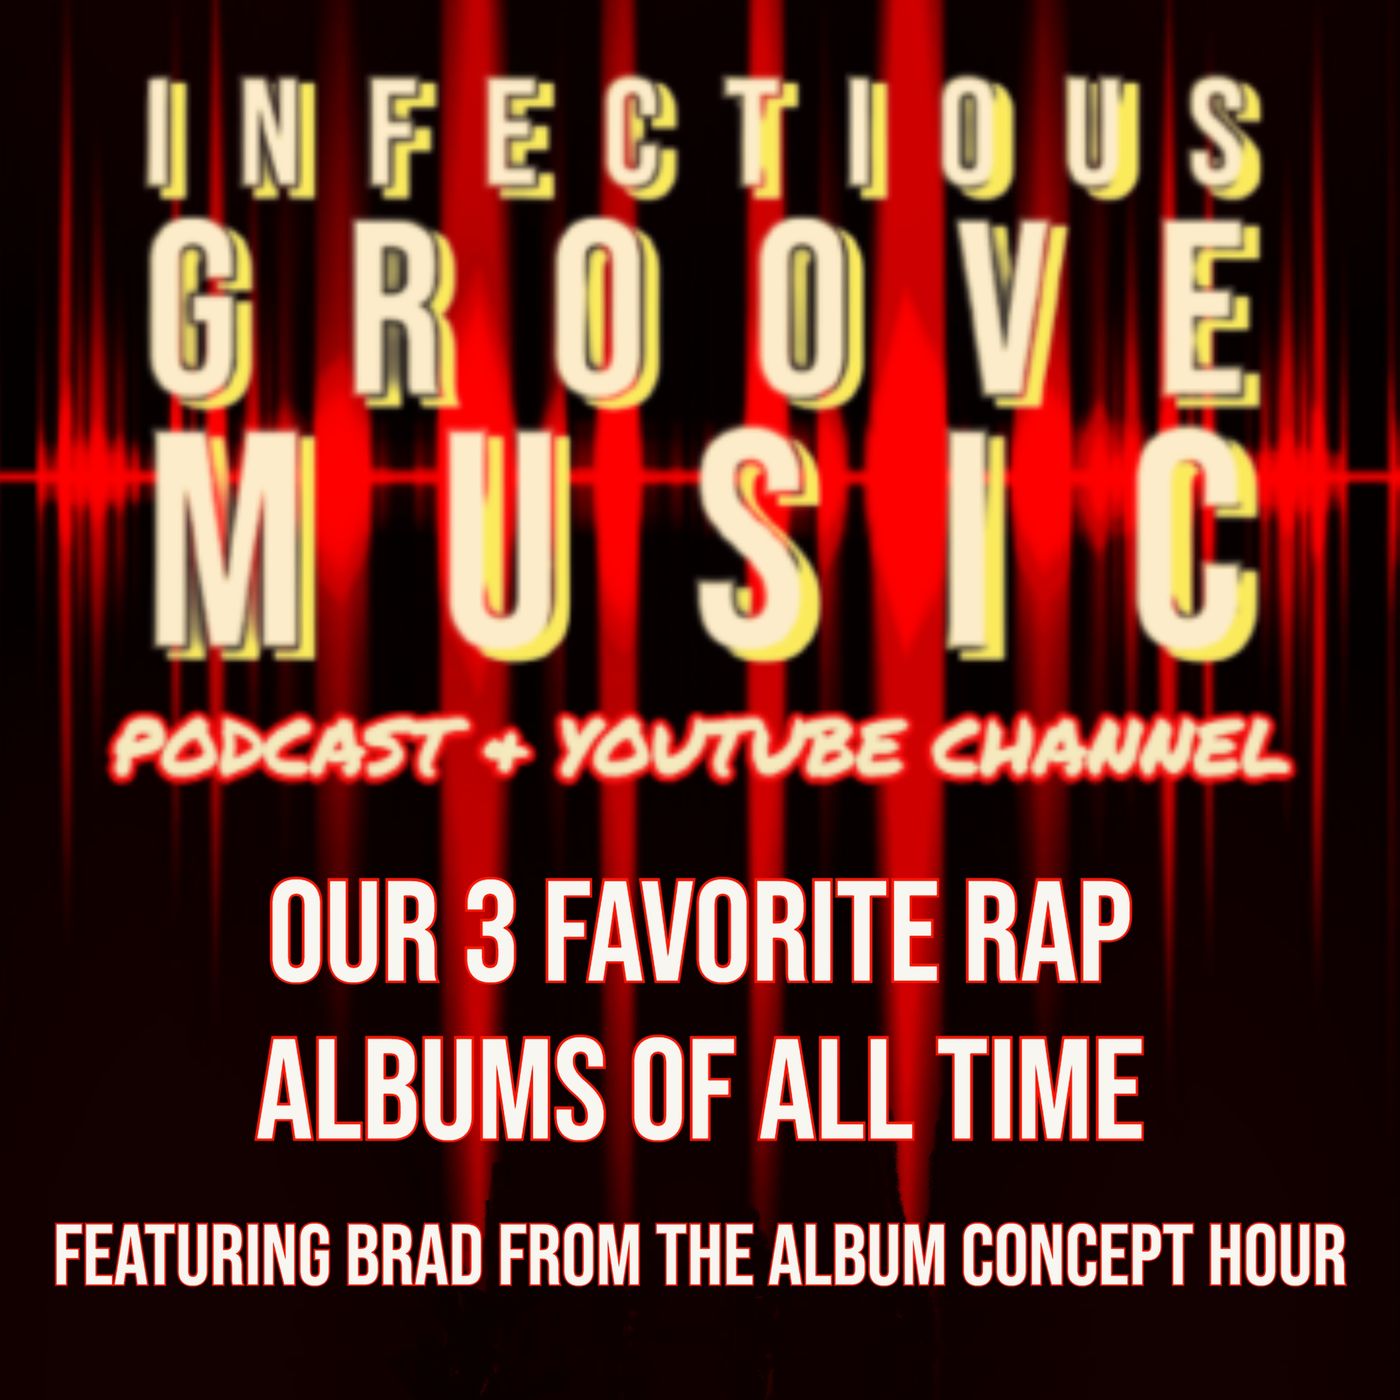 Our 3 Favorite Rap Albums of All Time featuring Brad of Album Concept Hour